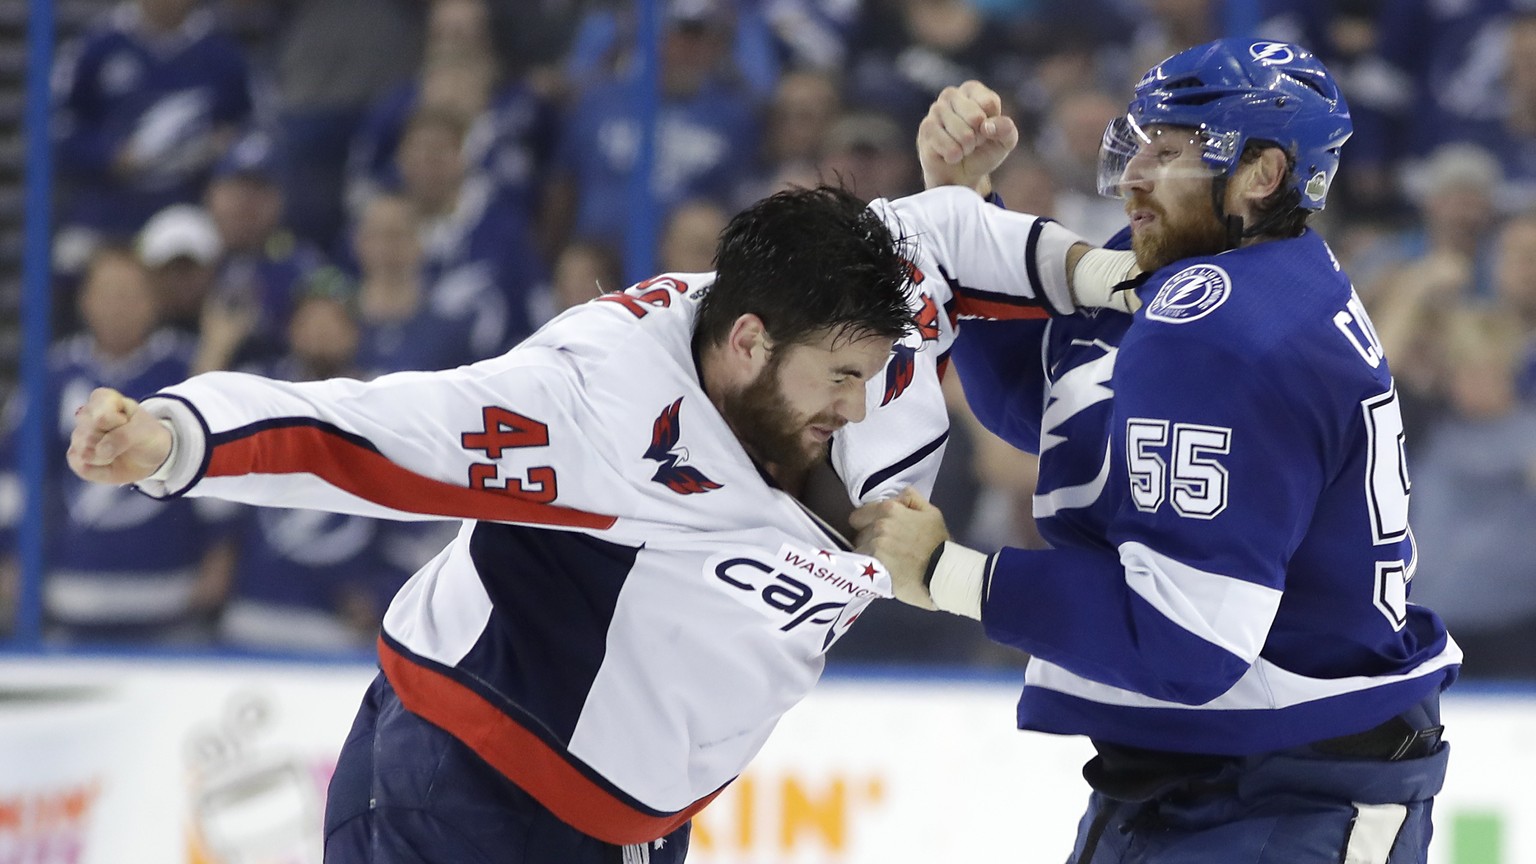 Tampa Bay Lightning defenseman Braydon Coburn (55) and Washington Capitals right wing Tom Wilson (43) fight during the first period of Game 7 of the NHL hockey playoffs Eastern Conference finals Wedne ...